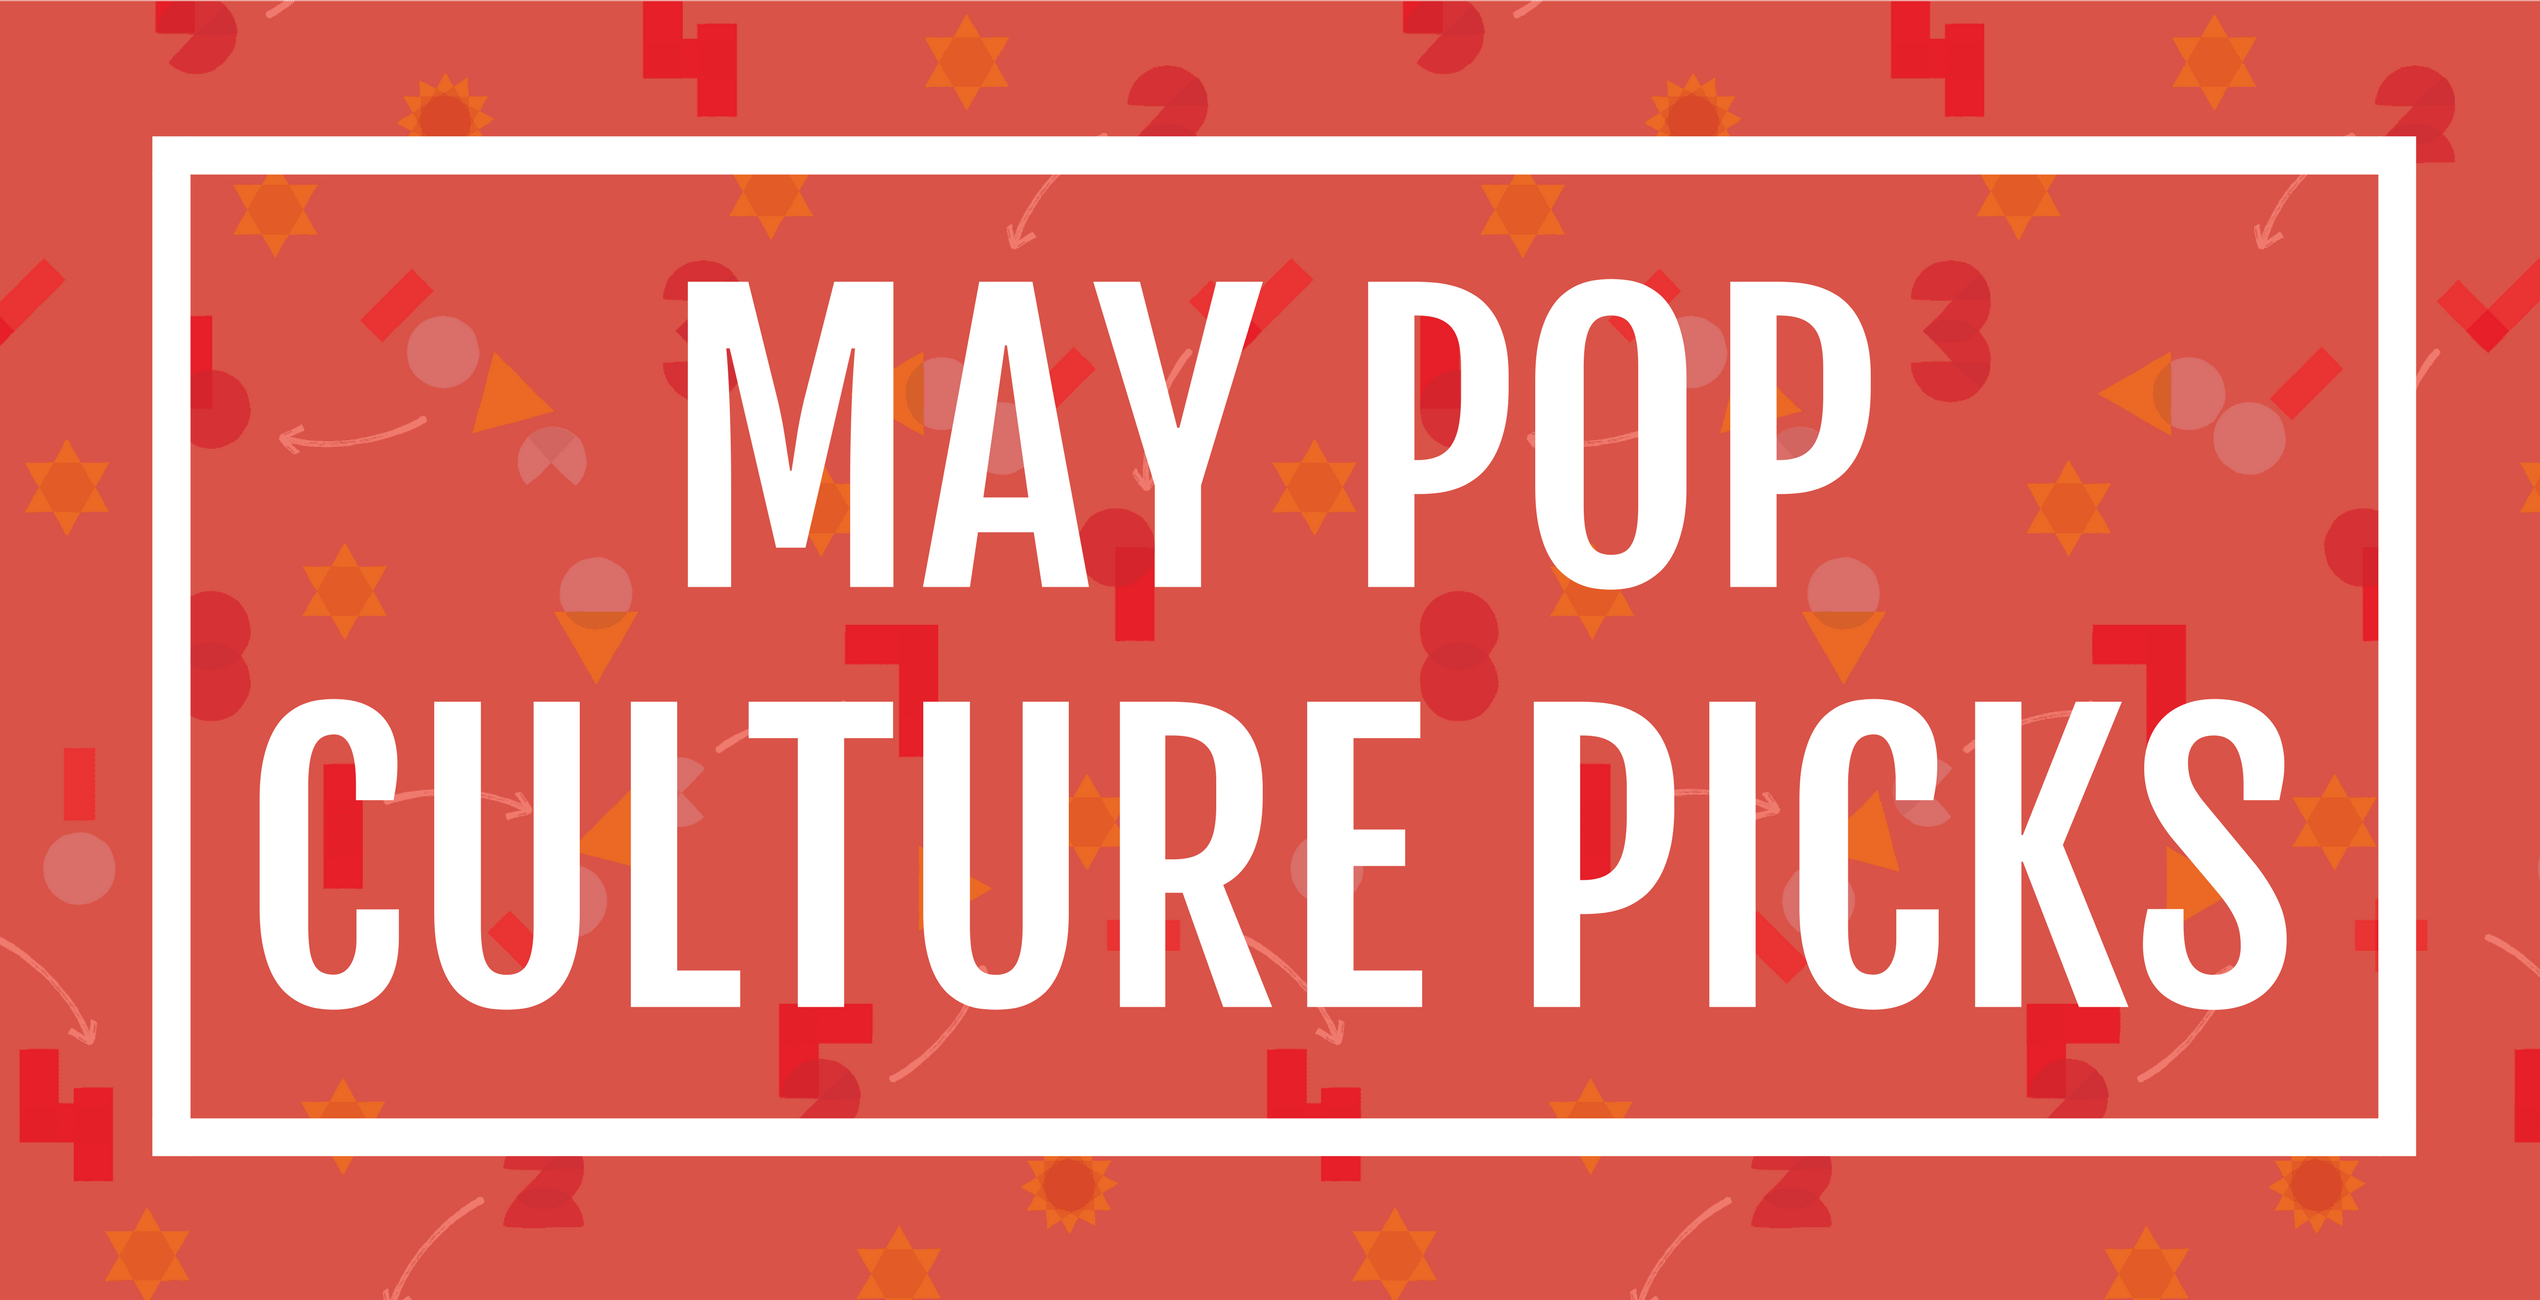 May Pop Culture Picks, our top pop culture recommendations here at Appreciation Engine (AE).